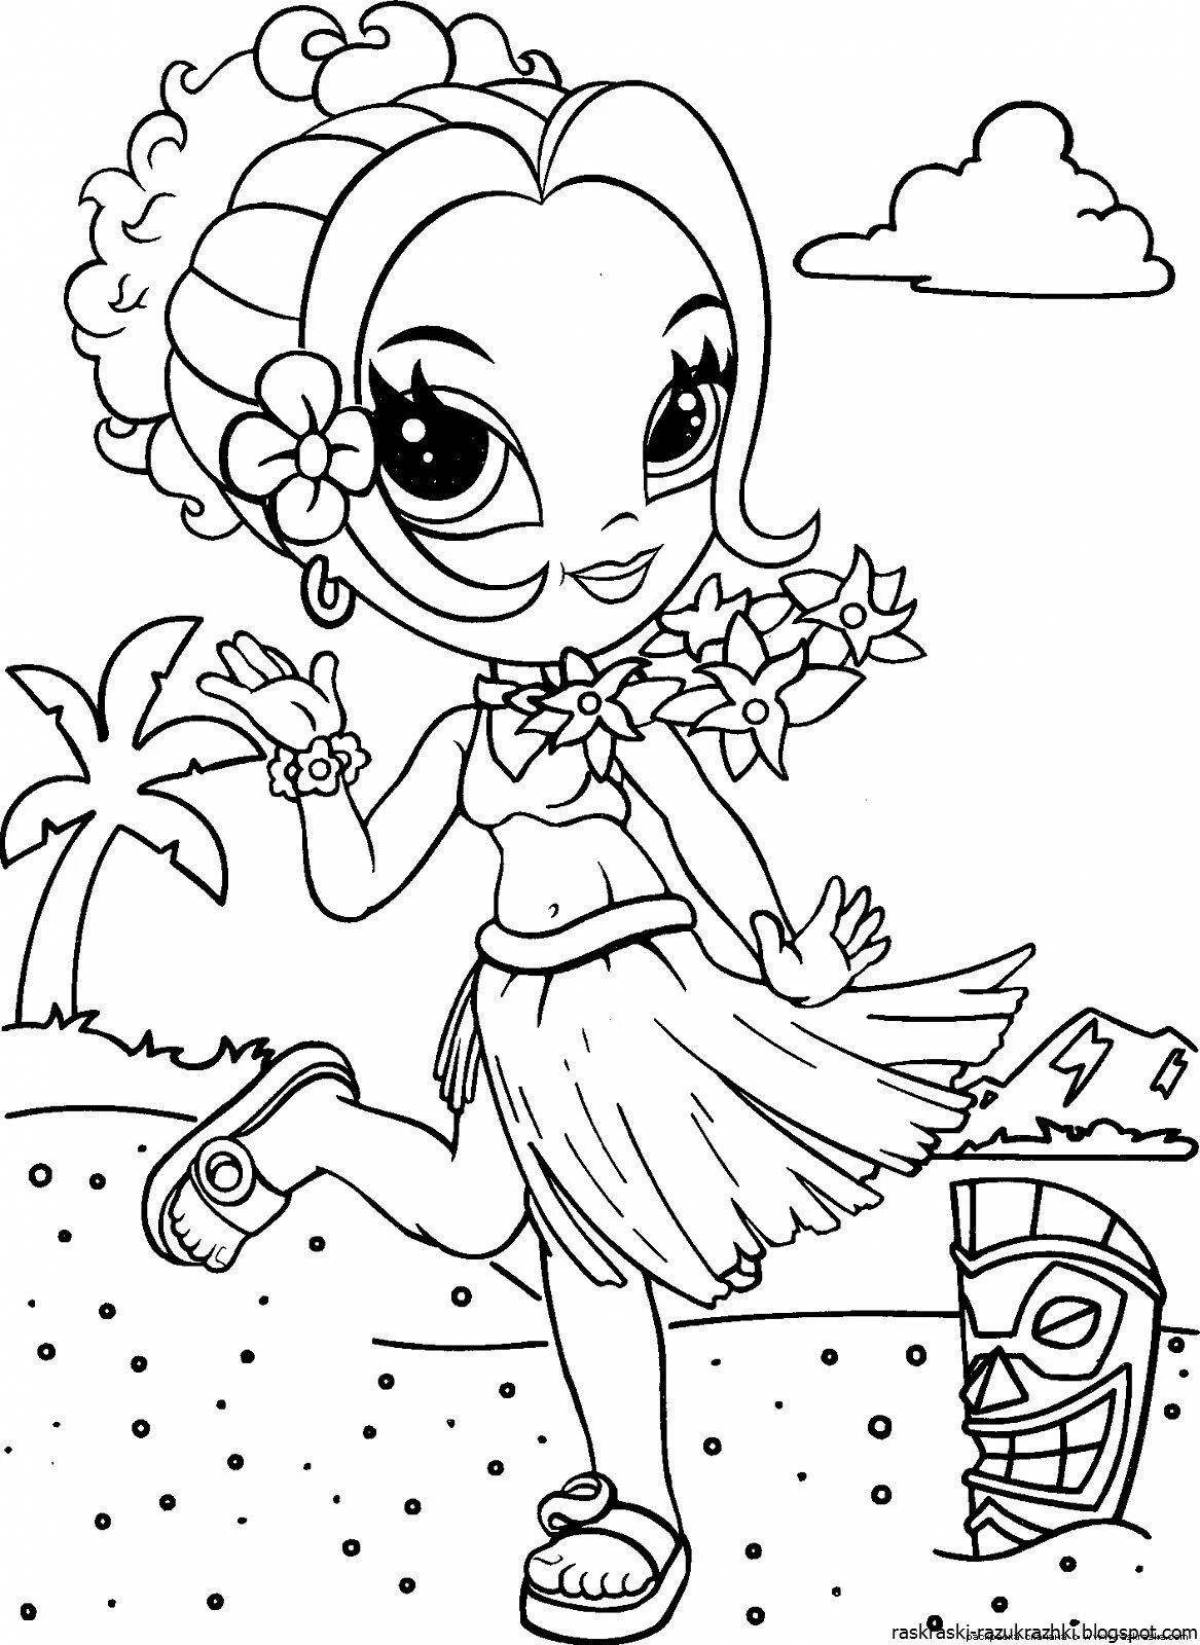 Crazy coloring book for boys and girls 7 years old